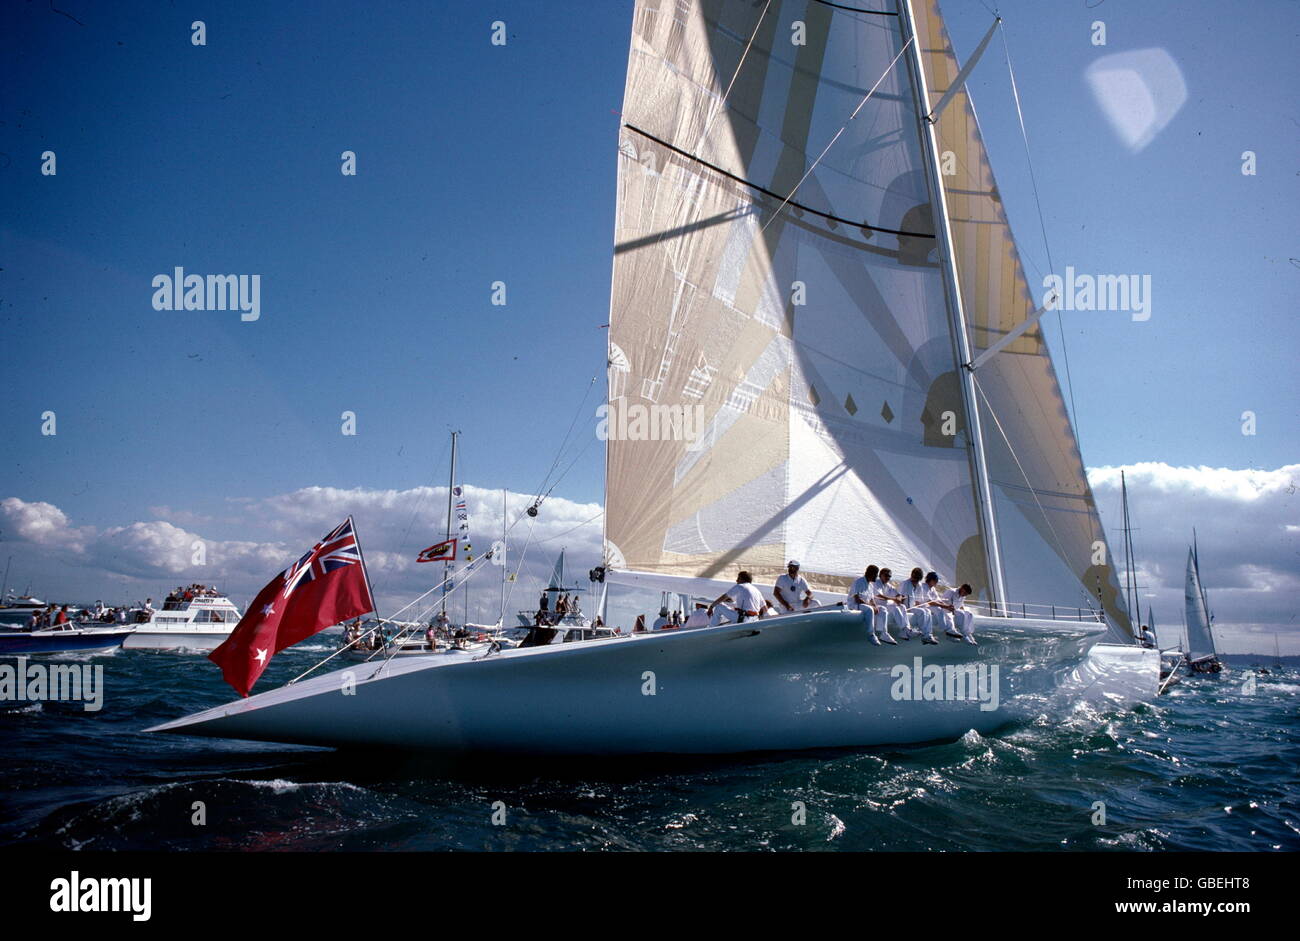 AJAXNETPHOTO. 1988. AUCKLAND, NEW ZEALAND. - AMERICA'S CUP - KZ1, NEW CHALLENGER FROM NEW ZEALAND ON TRIALS OFF AUCKLAND PHOTO:ADRIAN MORGAN/AJAX. REF:880208 Stock Photo